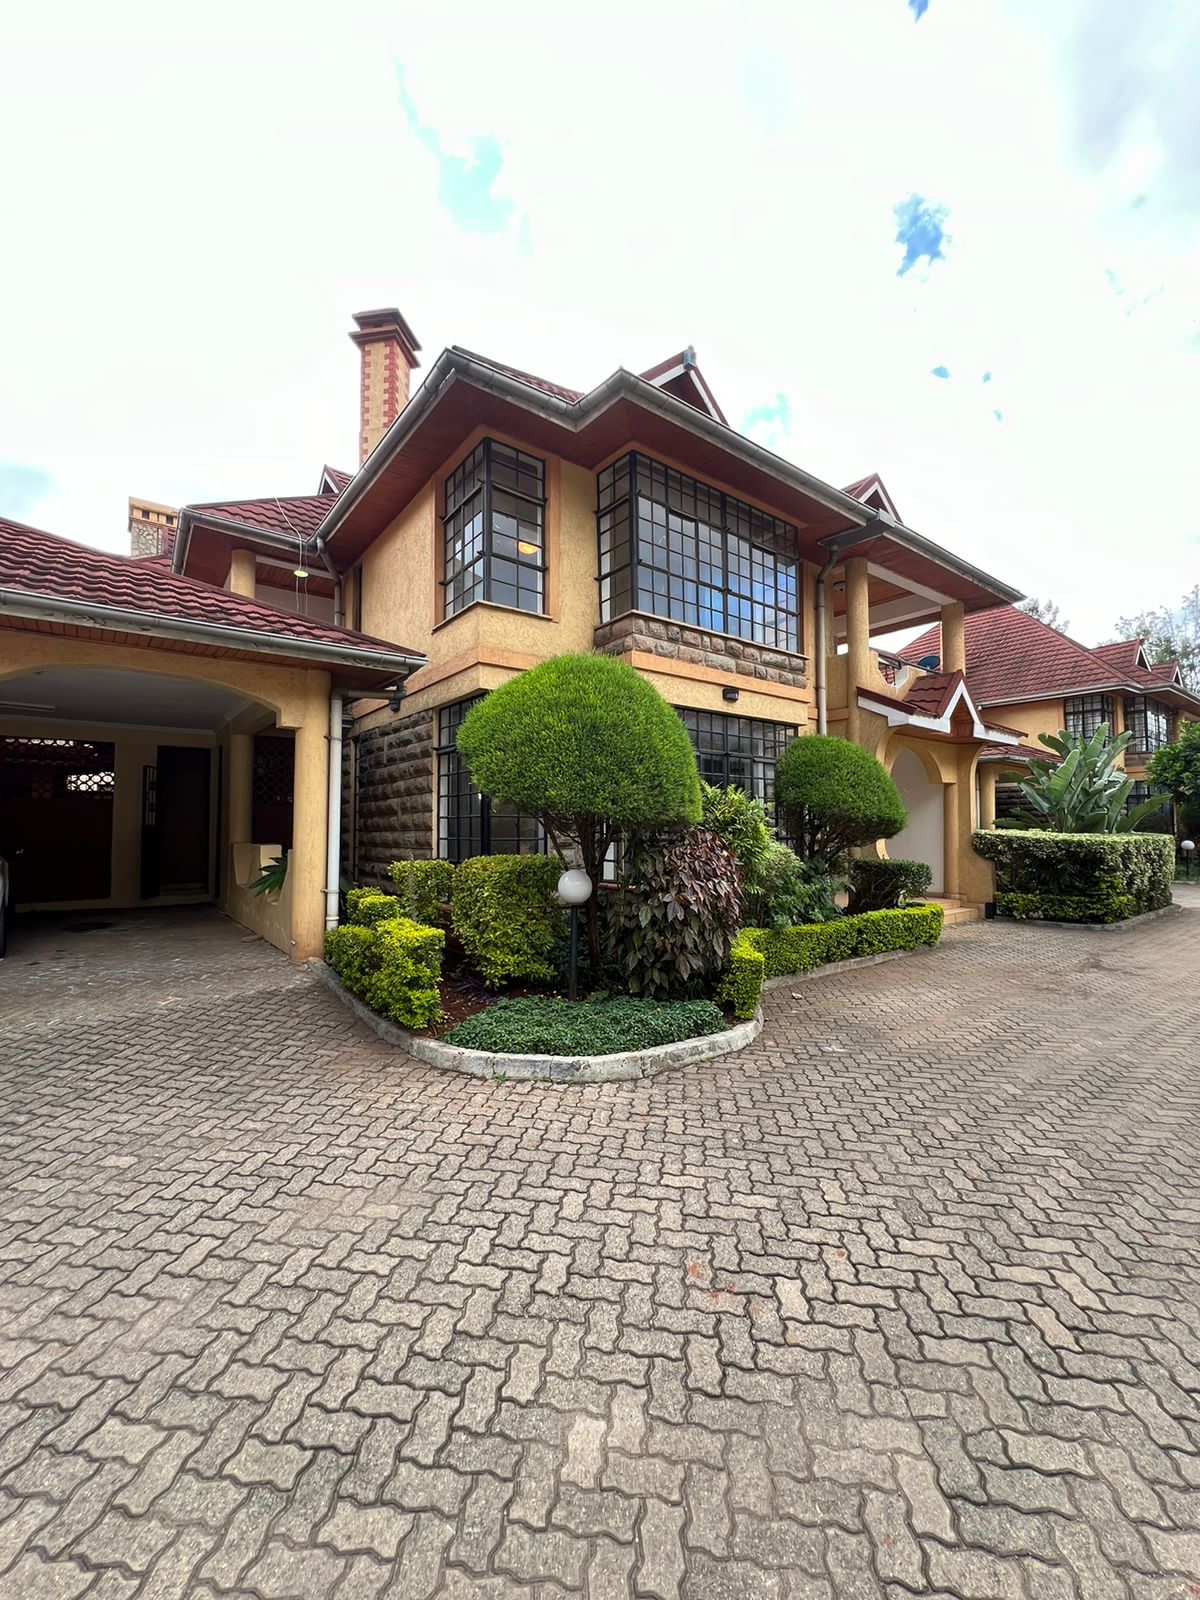 5-Bedroom Townhouse plus DSQ For Sale in Lavington. Has all bedroom En suite and a DSQ. Asking Price: 65M. Musilli Homes